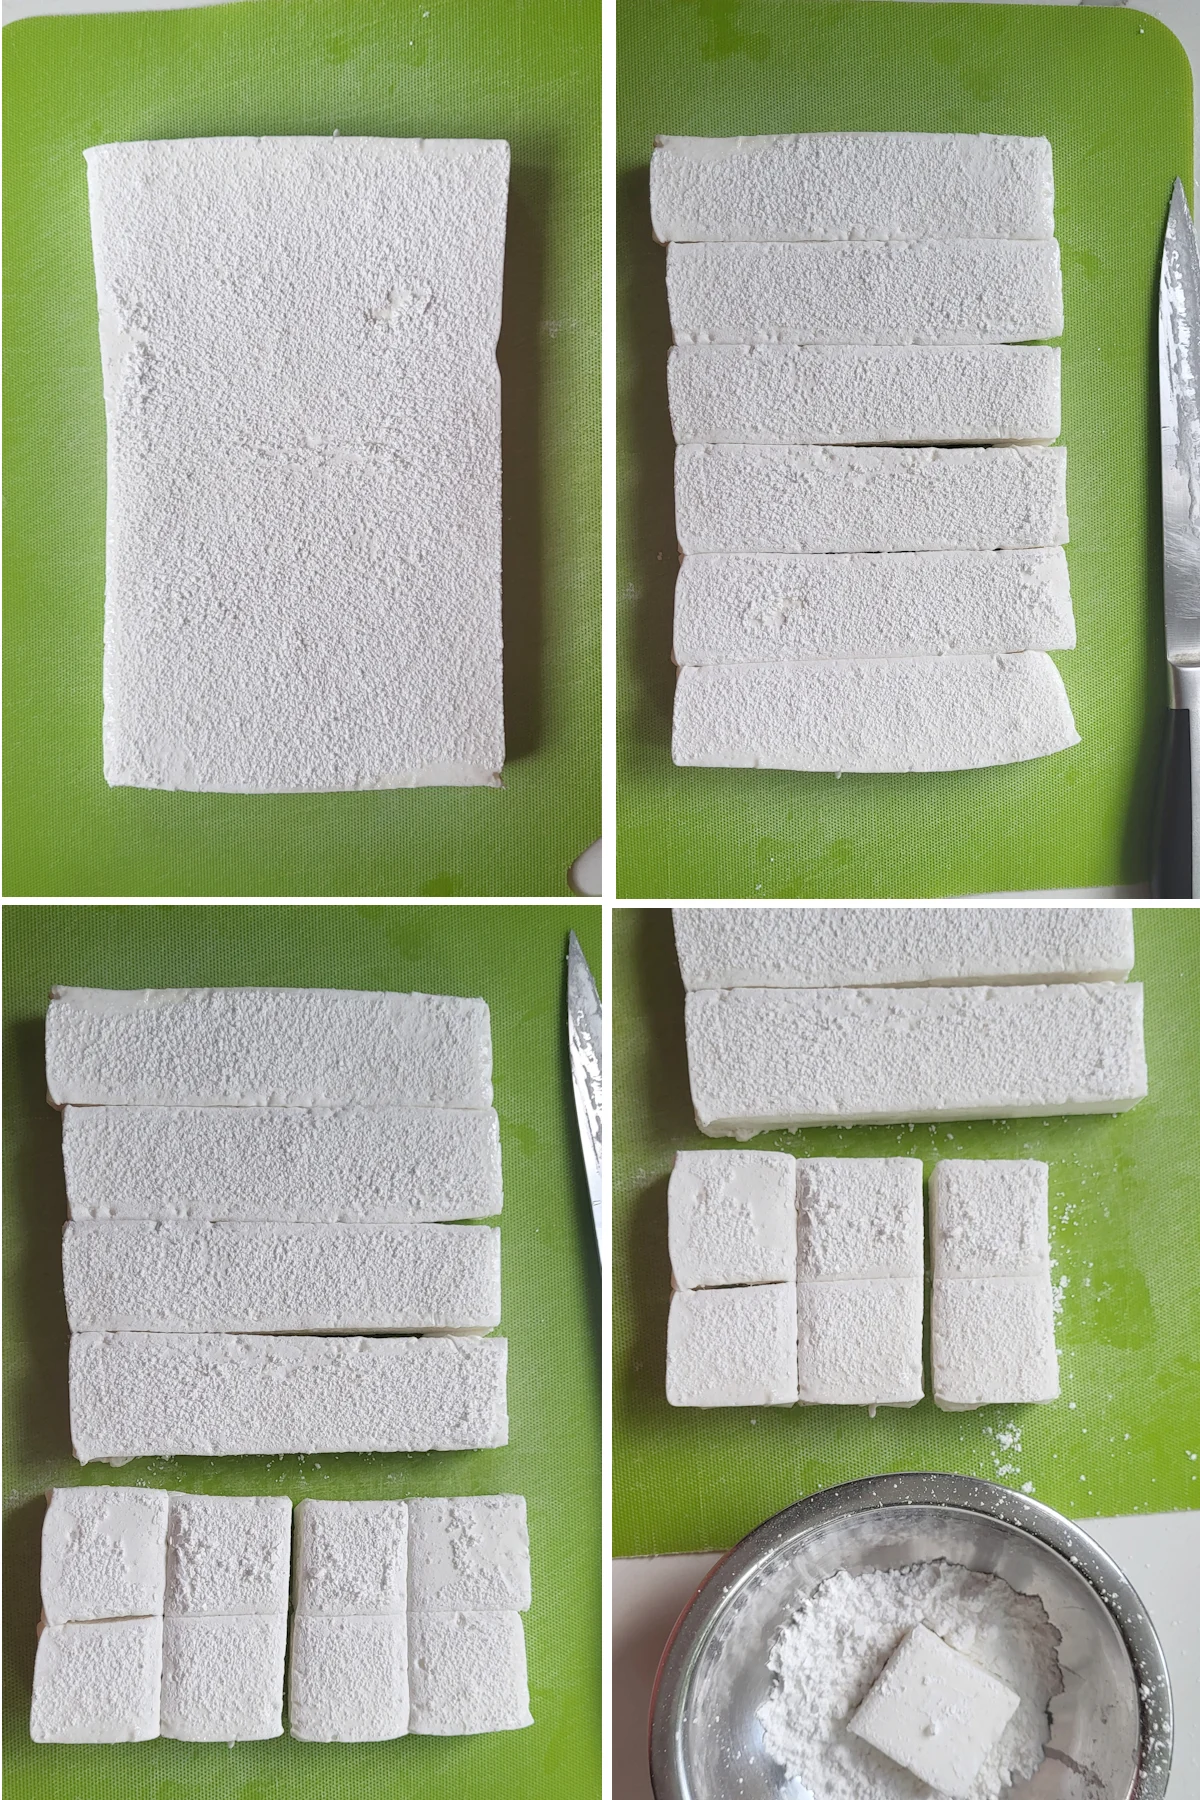 cutting strips and squares of marshmallow.